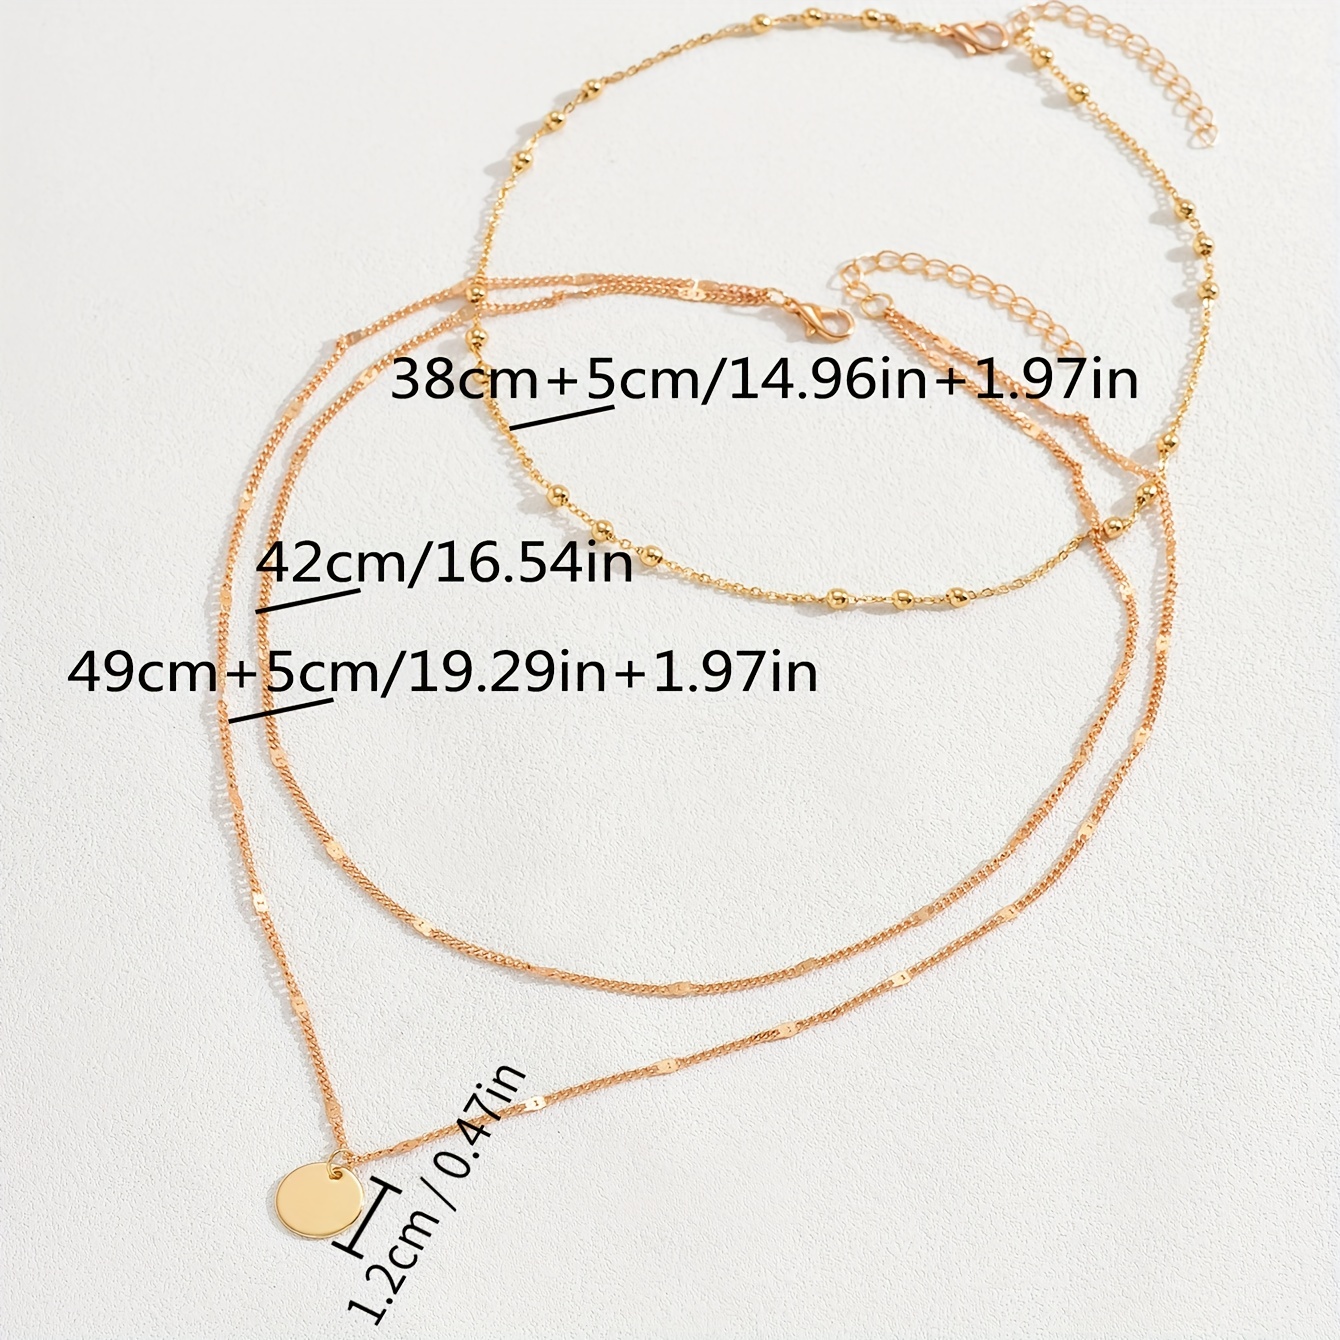 Simple Double Circle Pendant Clavicle Chain Necklace Copper Golden Necklace  Chain For Women Daily Party Jewelry Gift